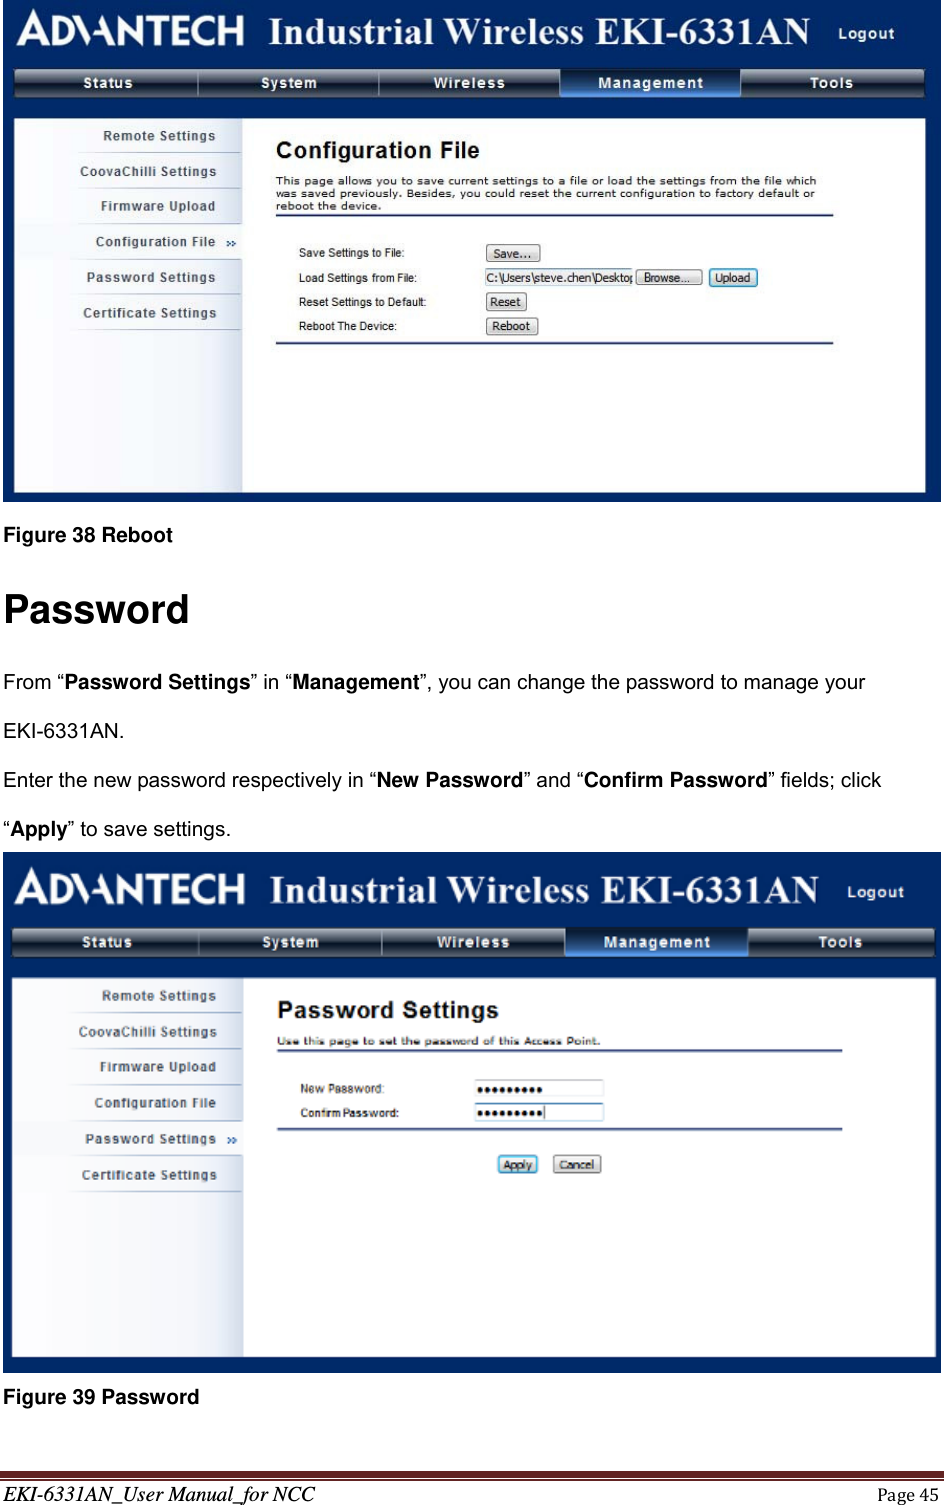 EKI-6331AN_User Manual_for NCCPage45 Figure 38 Reboot Password From “Password Settings” in “Management”, you can change the password to manage your EKI-6331AN. Enter the new password respectively in “New Password” and “Confirm Password” fields; click “Apply” to save settings.  Figure 39 Password 